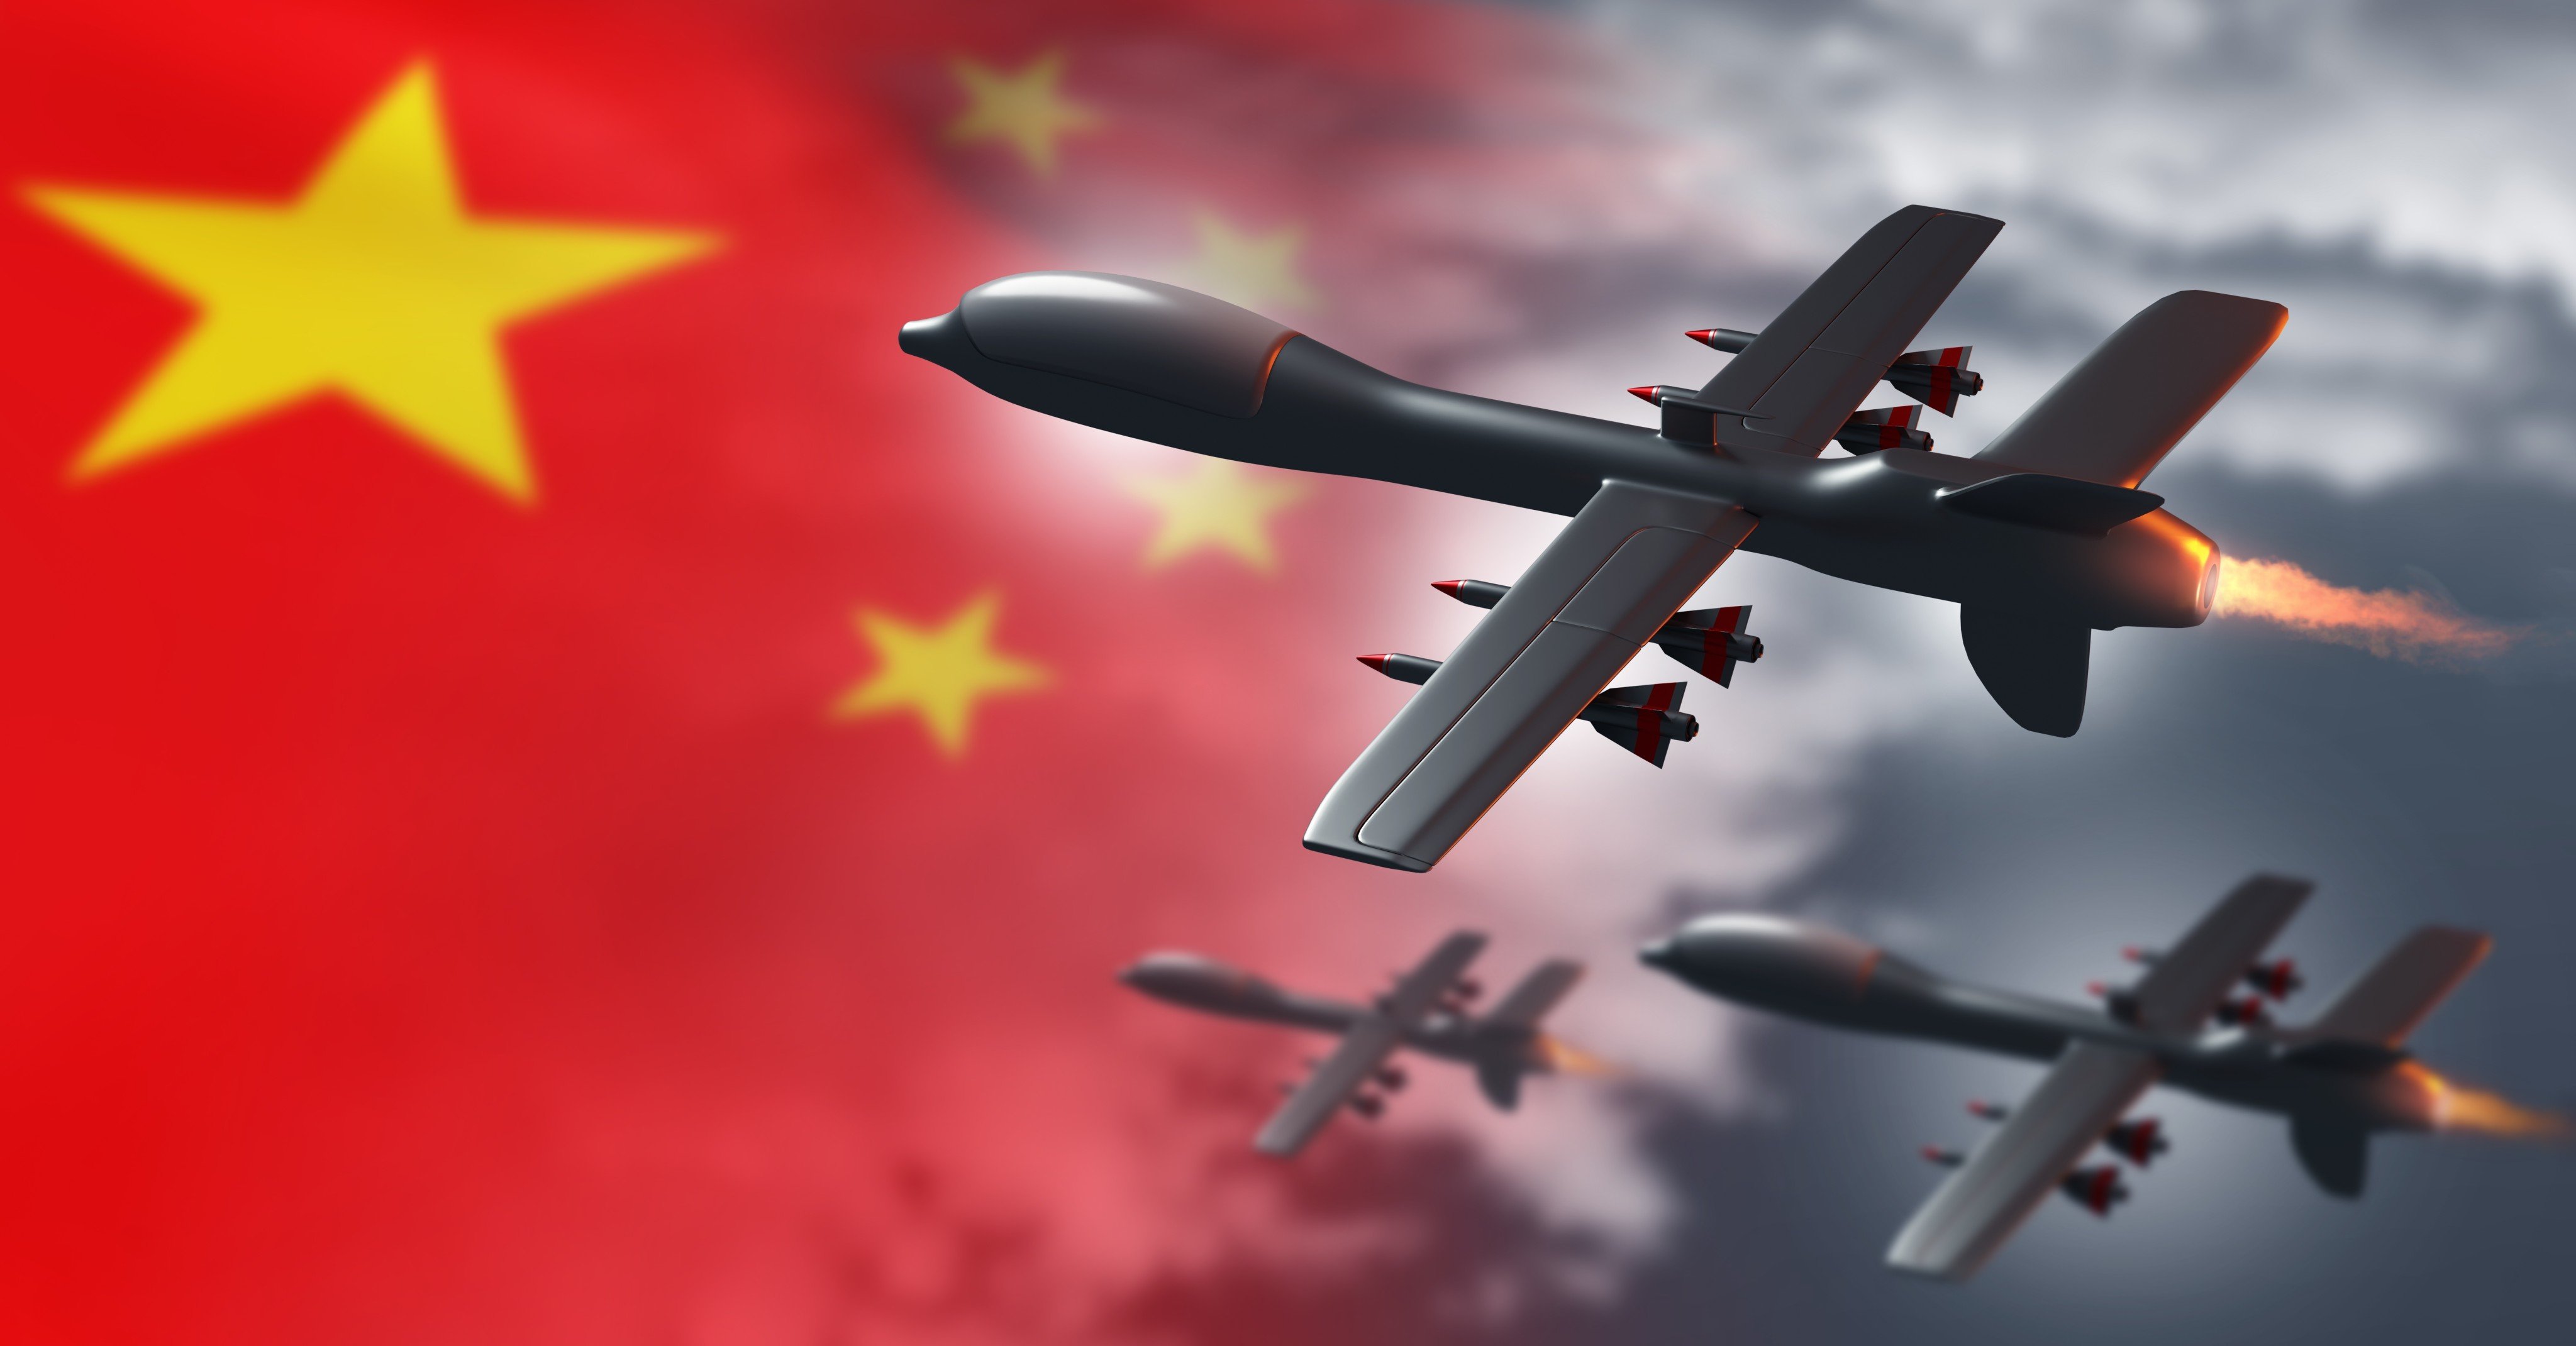 The Chinese military has developed a drone that it hopes will replace human special ops agents for dangerous missions within the next 10 years. Photo: Shutterstock